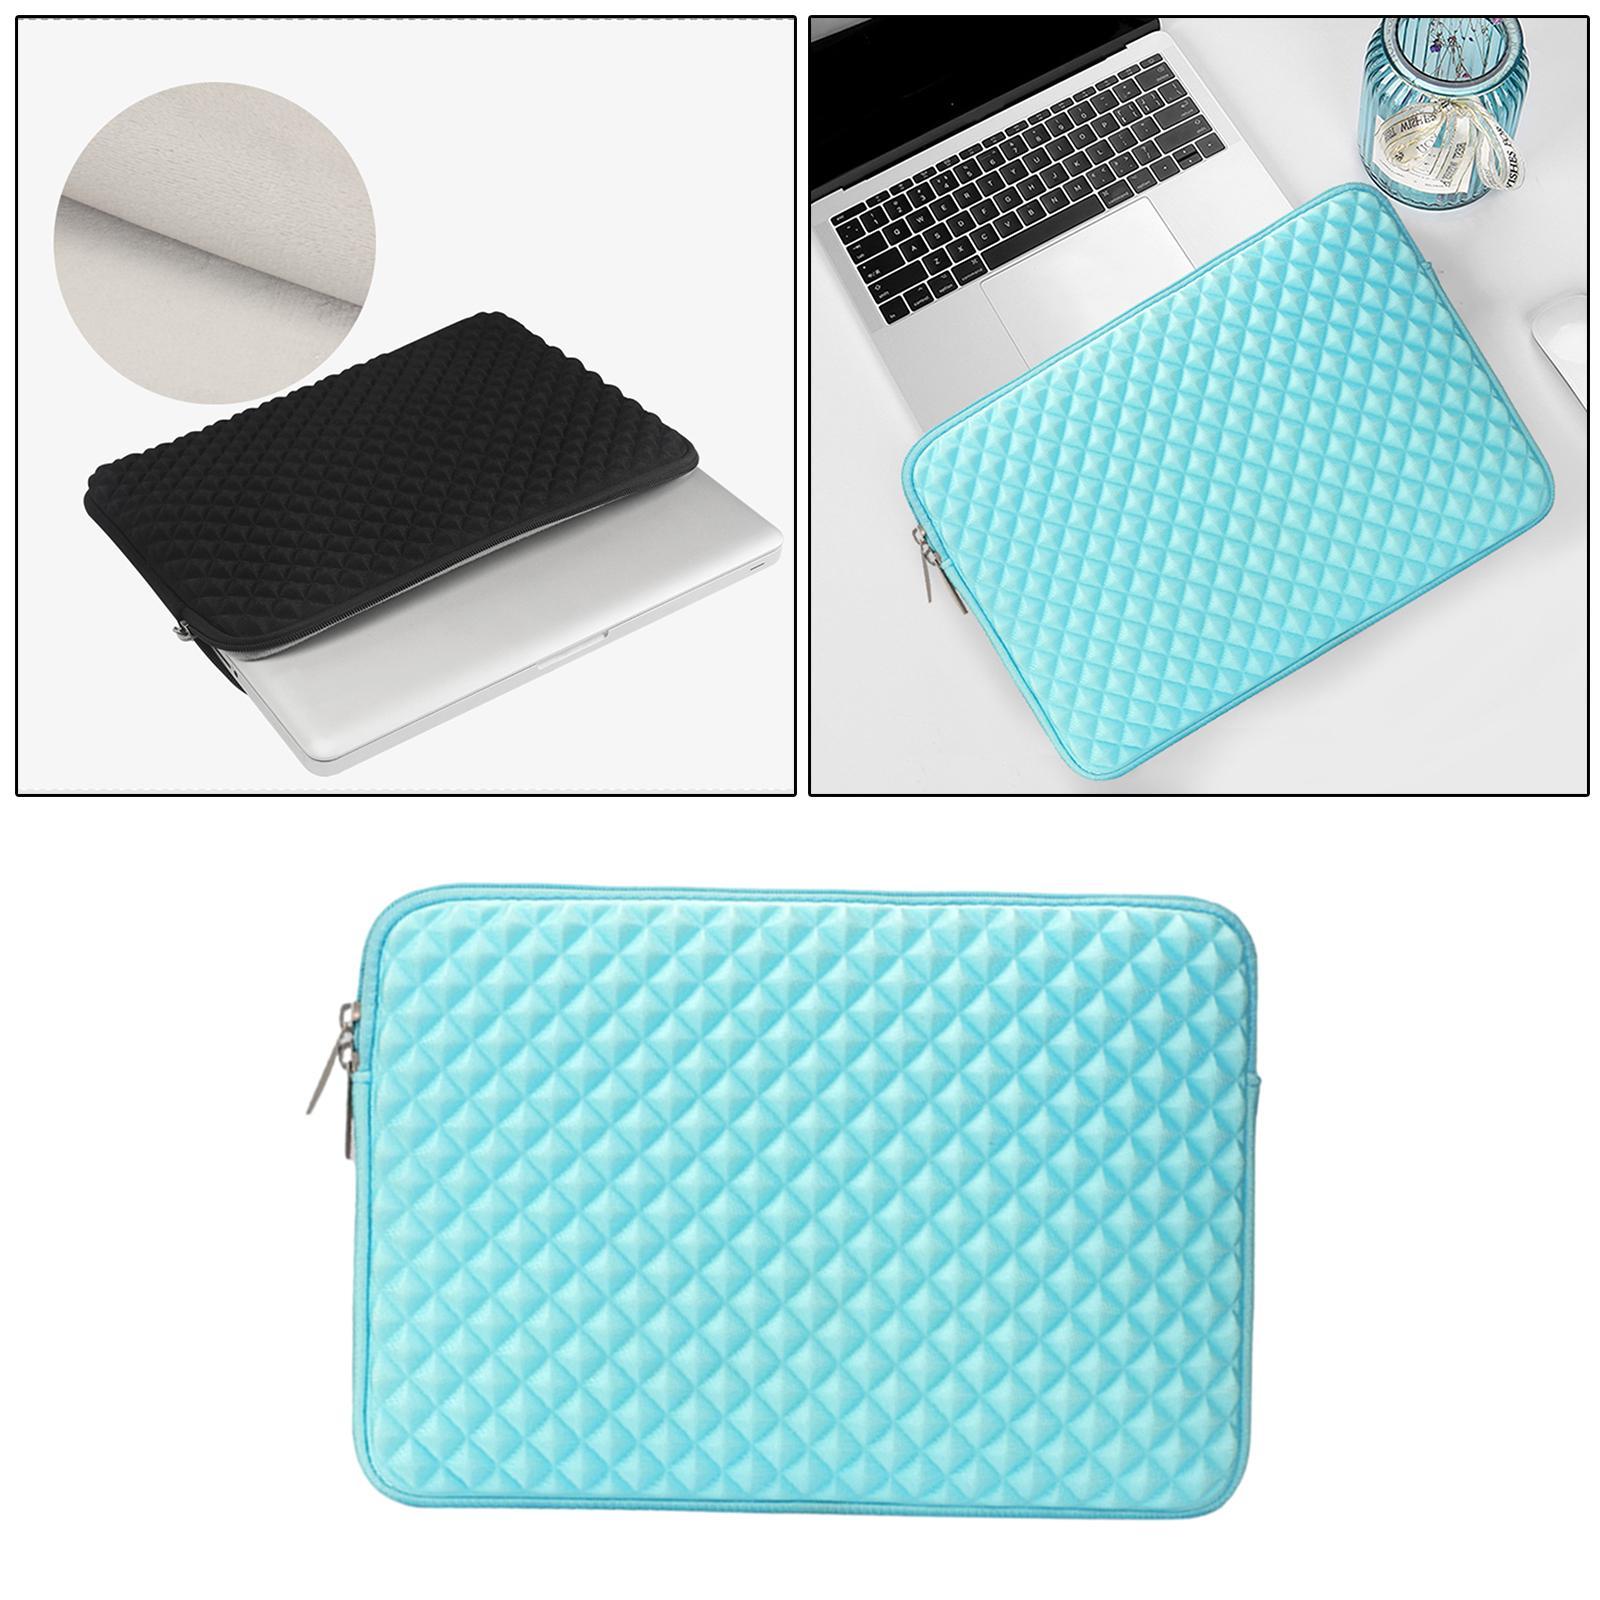 Laptop Sleeve Fits For Notebook Computer Neoprene Bag Cover Blue 13inch